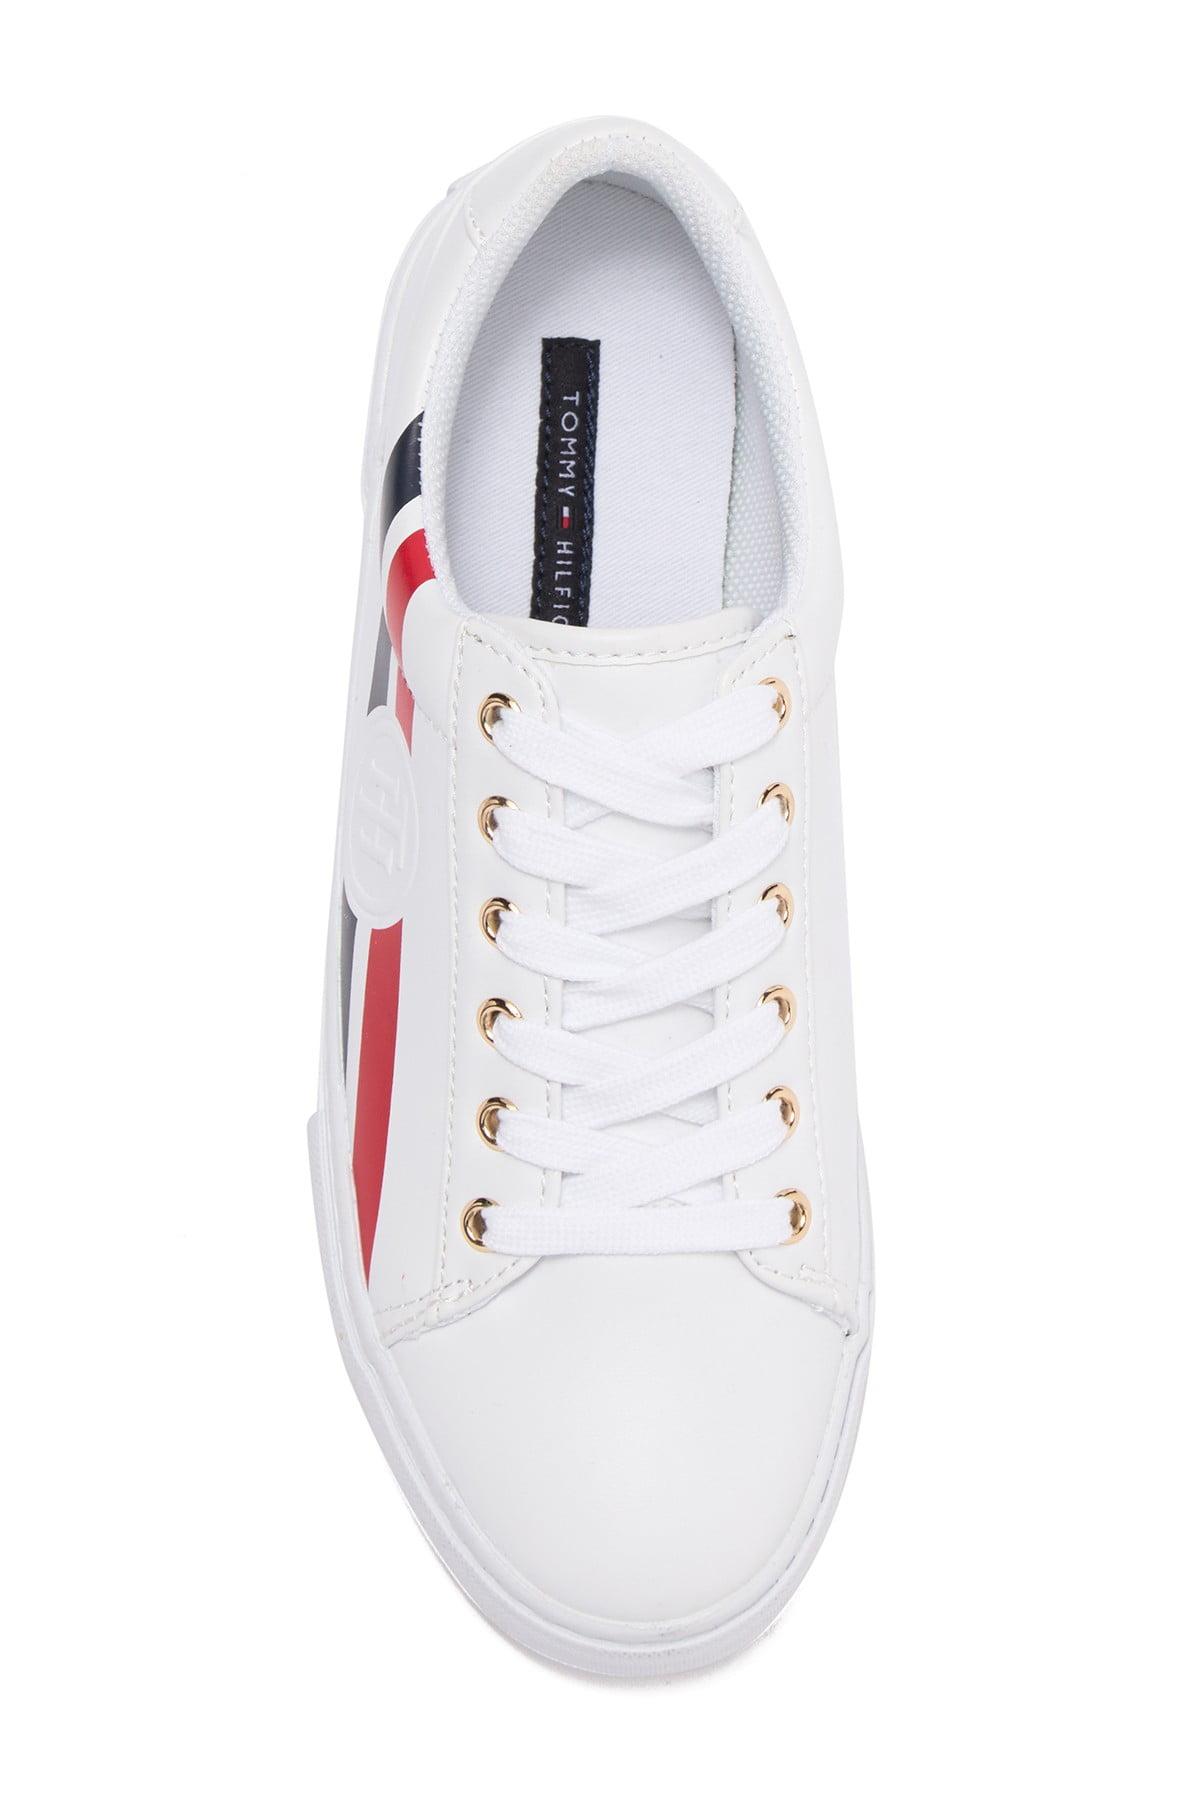 tommy hilfiger lindee sneakers